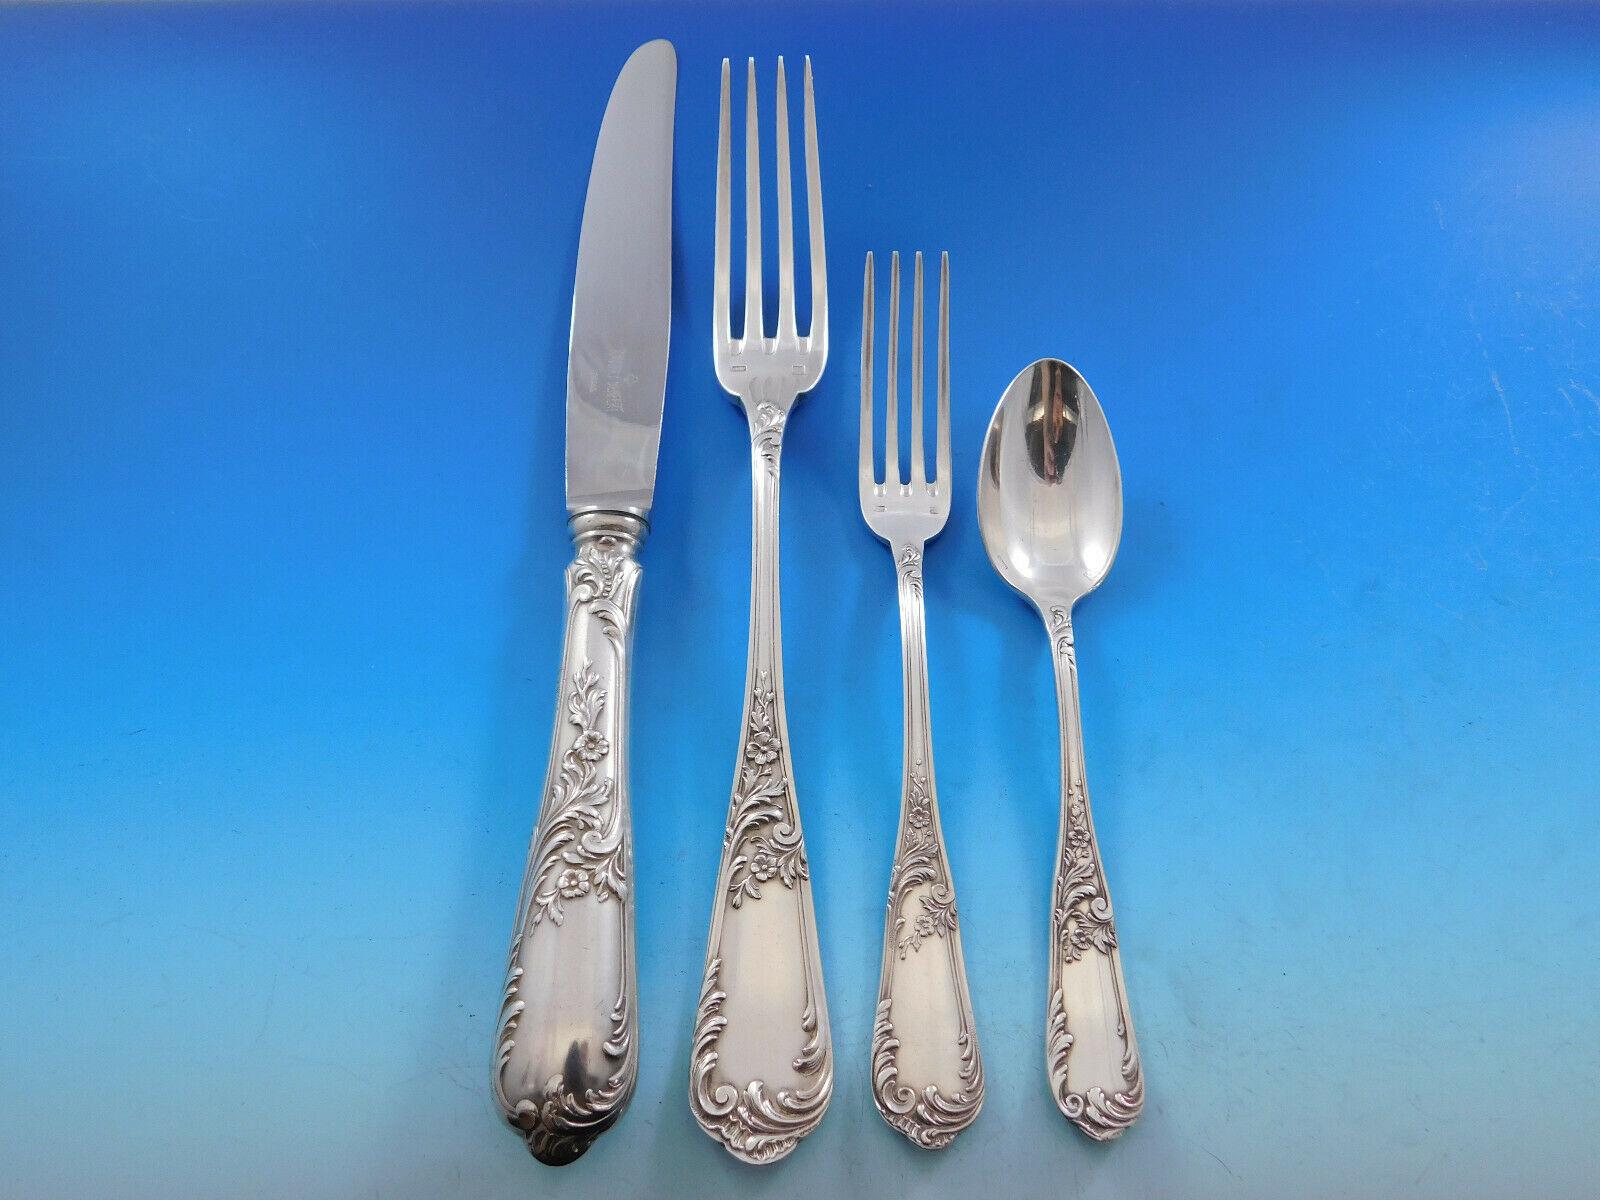 Marie Antoinette by D'enfert French Silverplate Flatware Silverware Service Set In Excellent Condition For Sale In Big Bend, WI